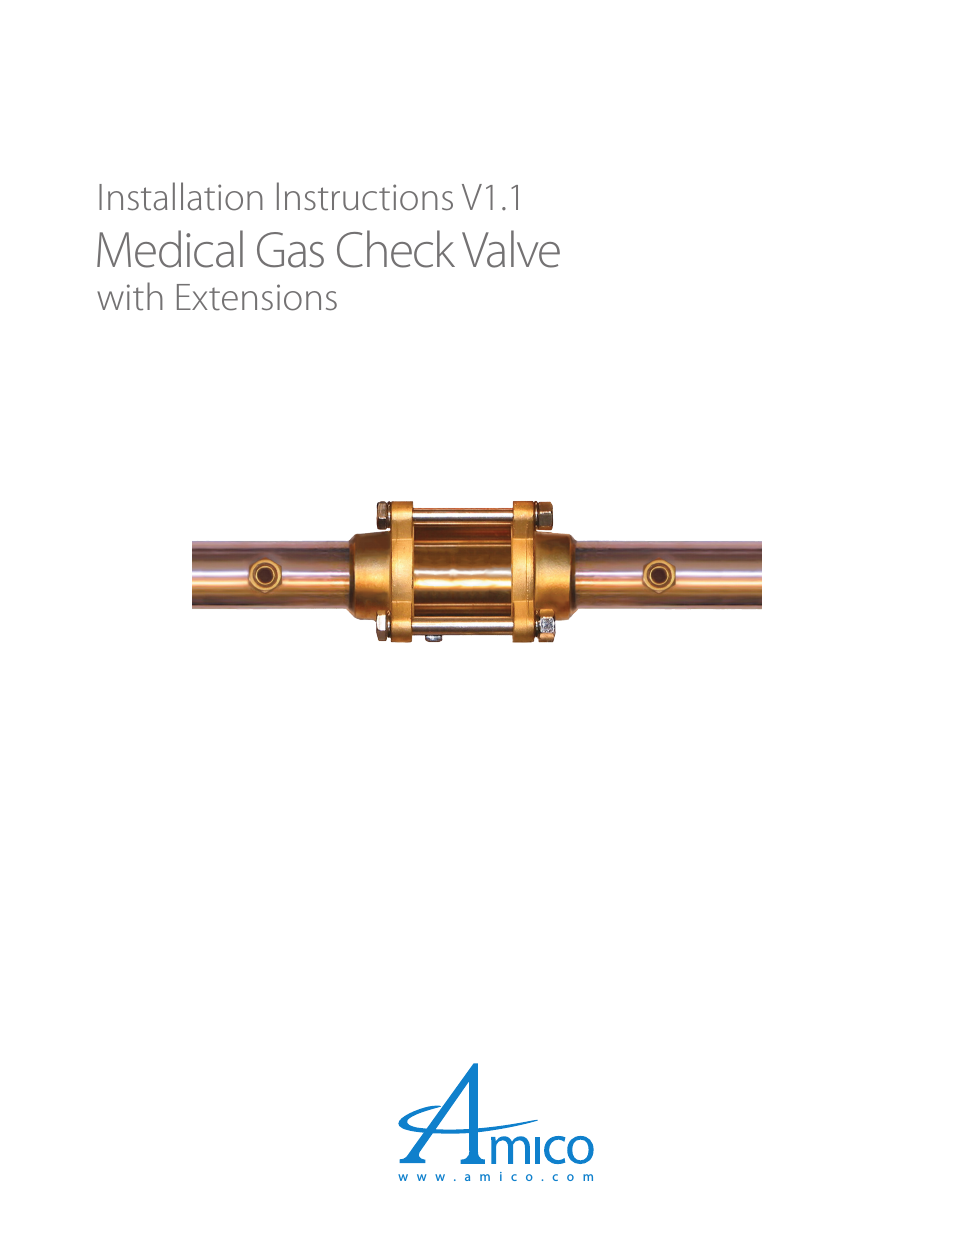 Medical Gas Check Valve with Extensions